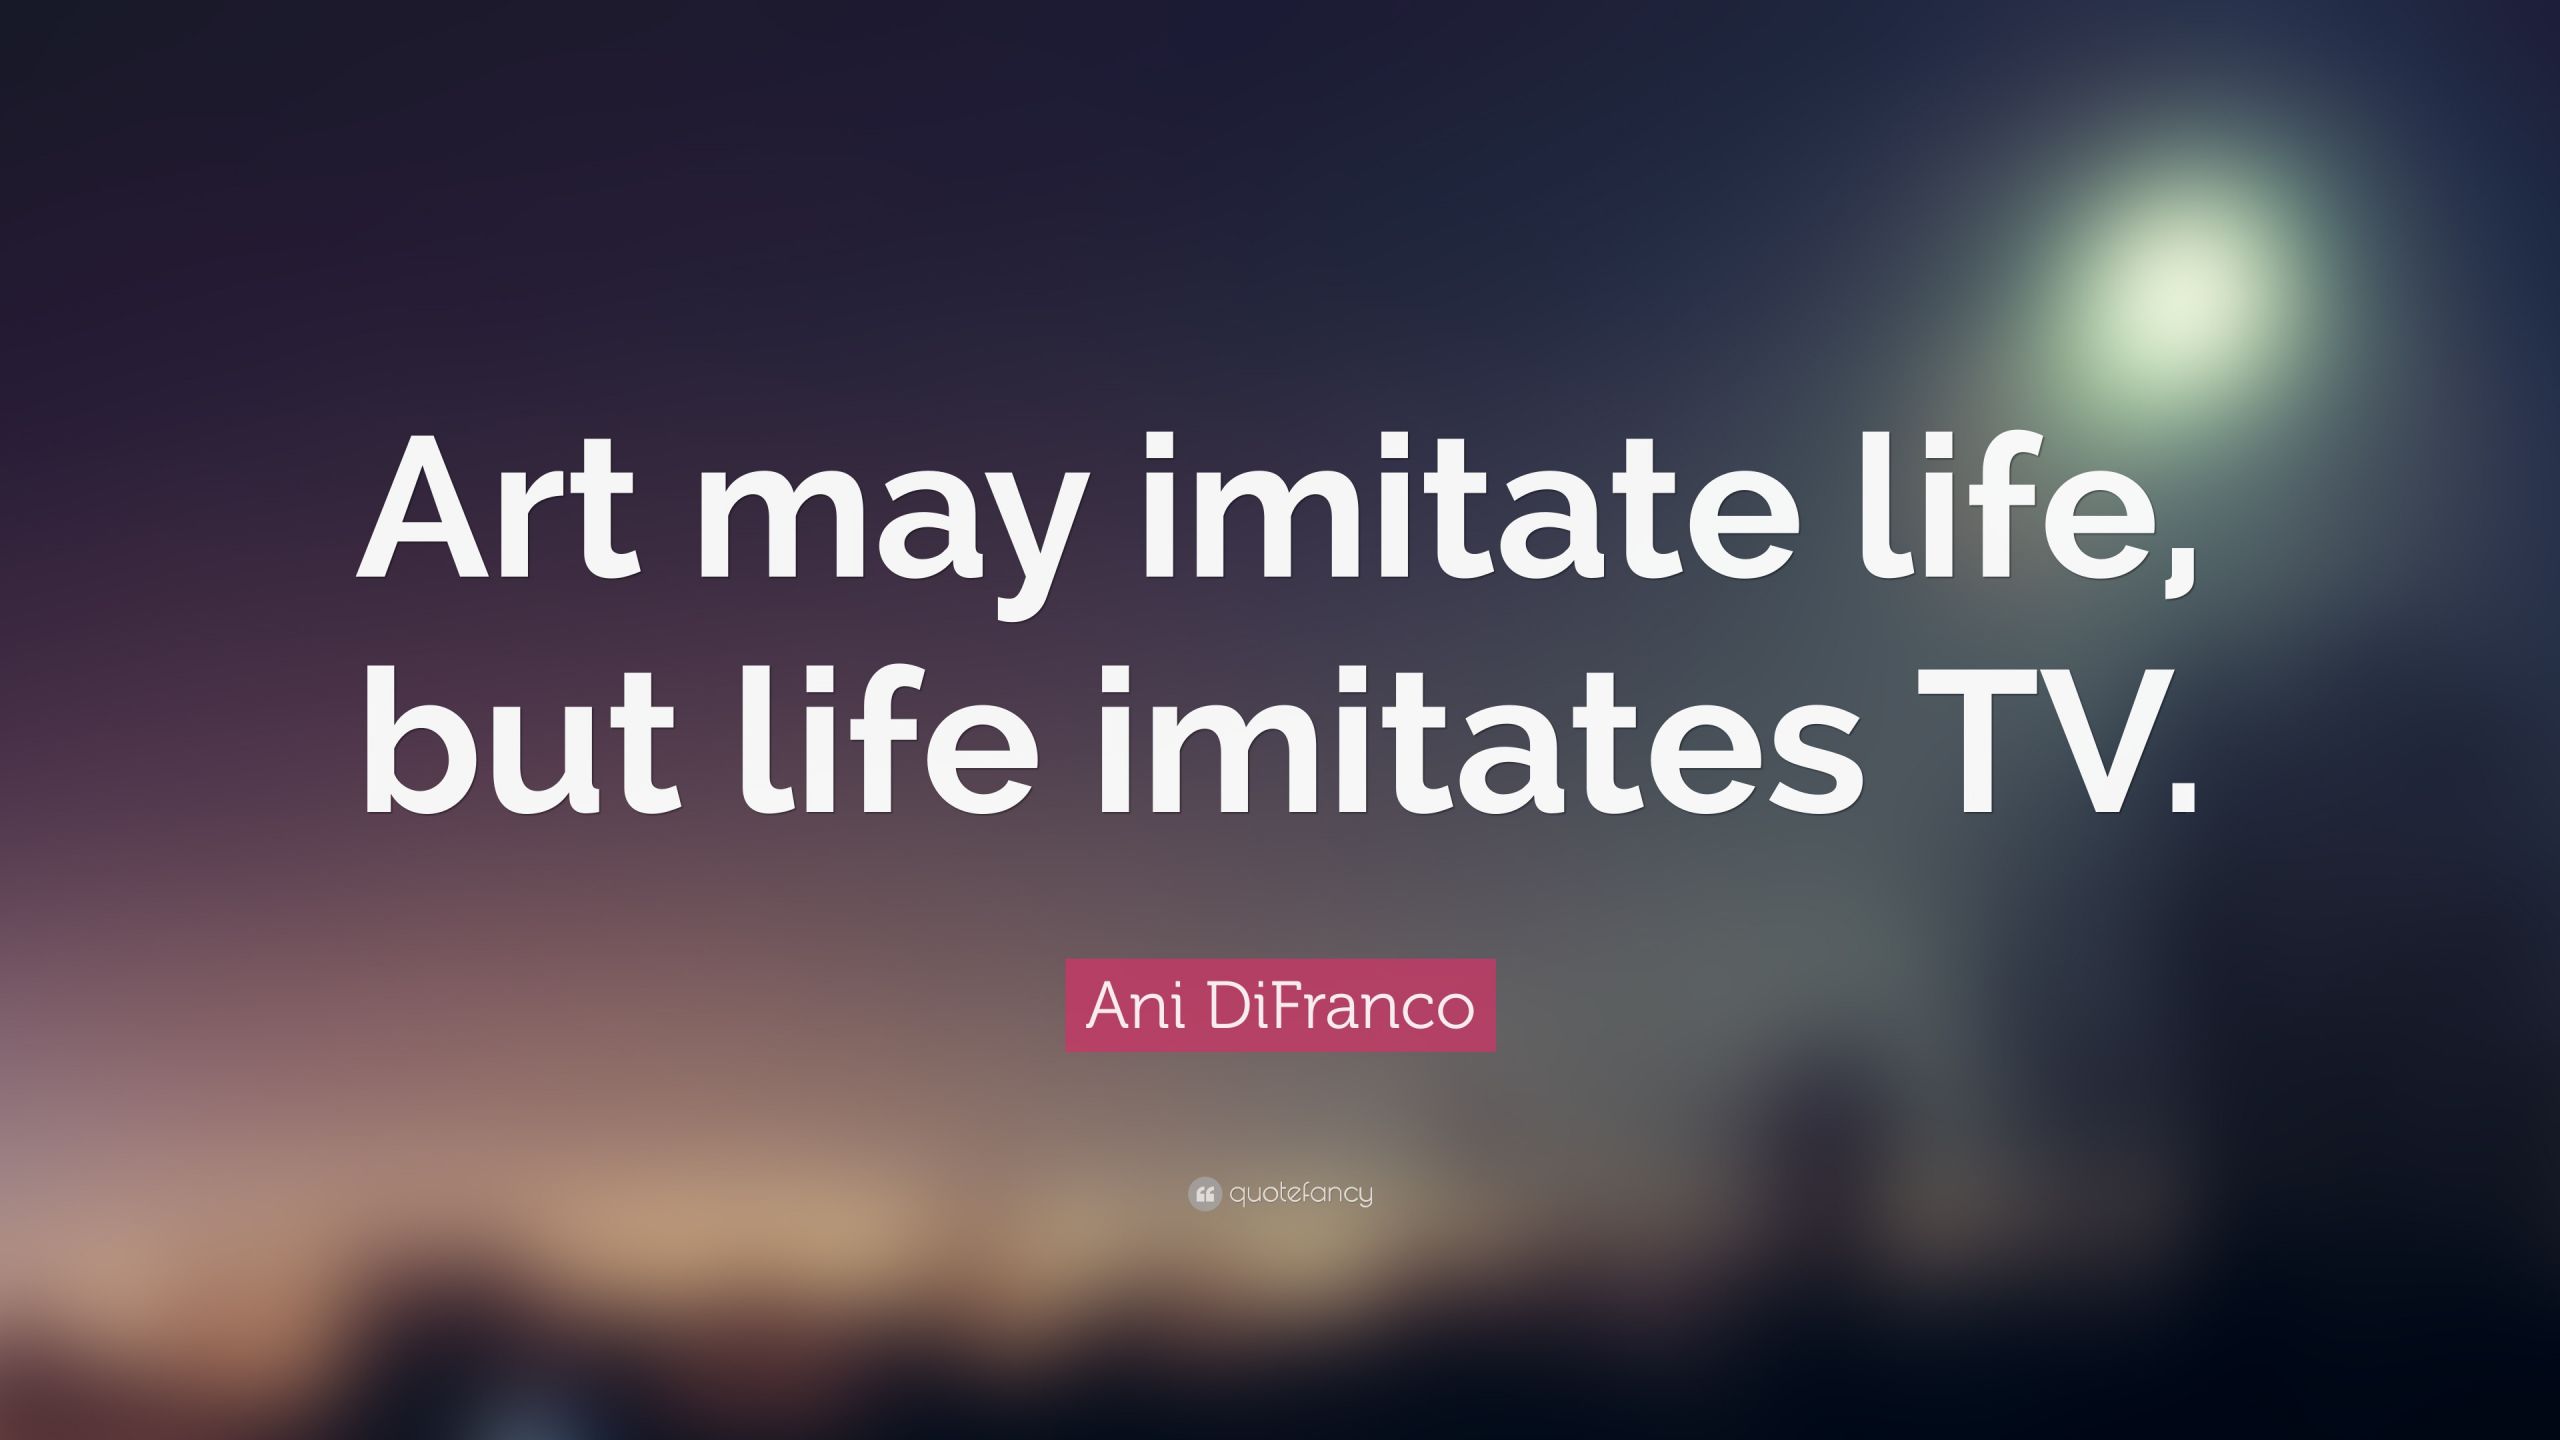 Art Imitating Life Quote
 Ani DiFranco Quotes 100 wallpapers Quotefancy